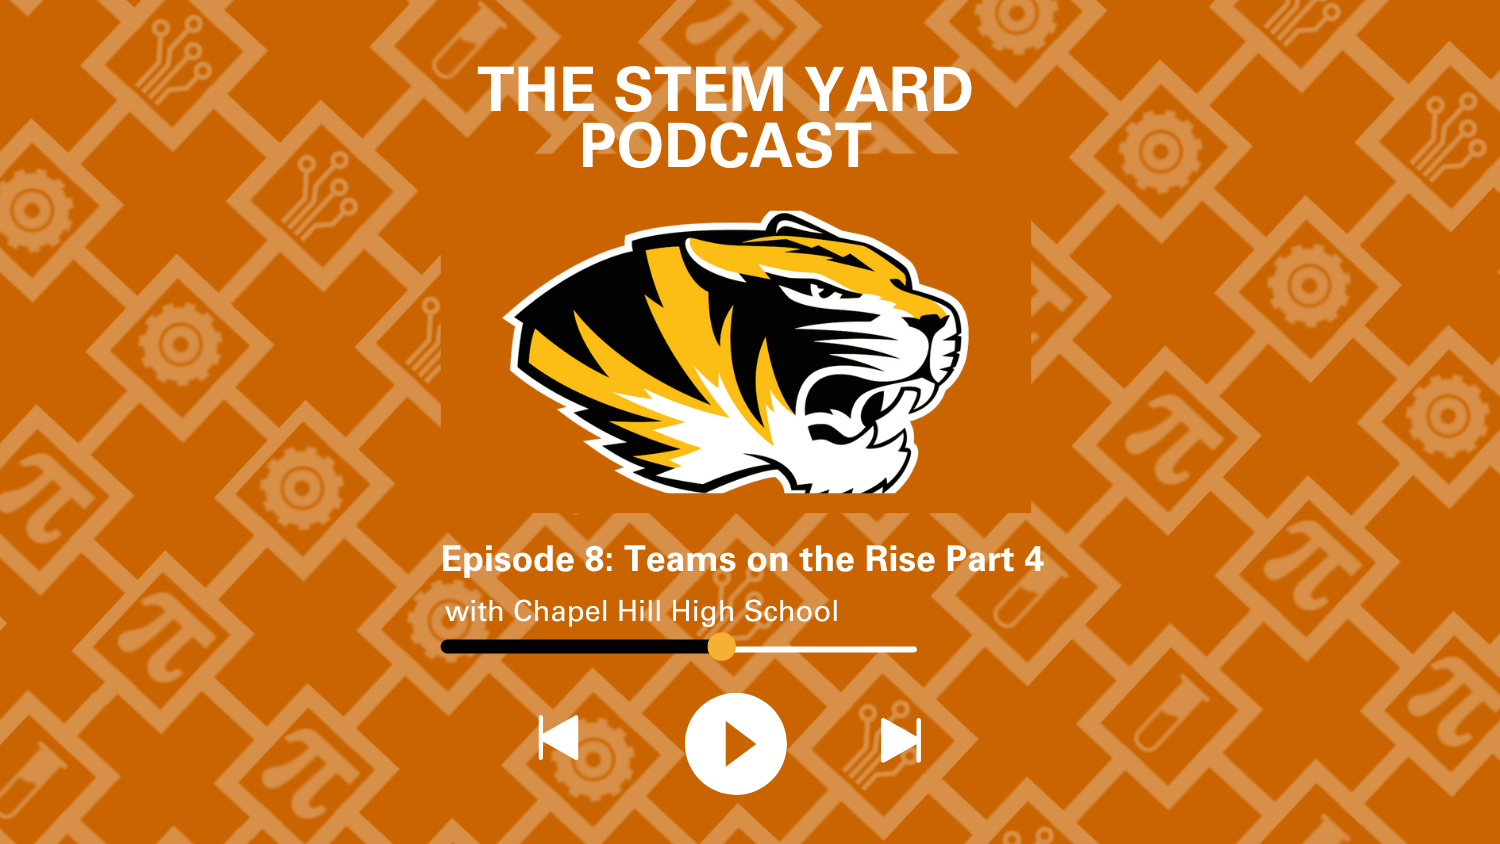 The STEM Yard Episode 8: Teams on the Rise Part 4 with Chapel Hill High School